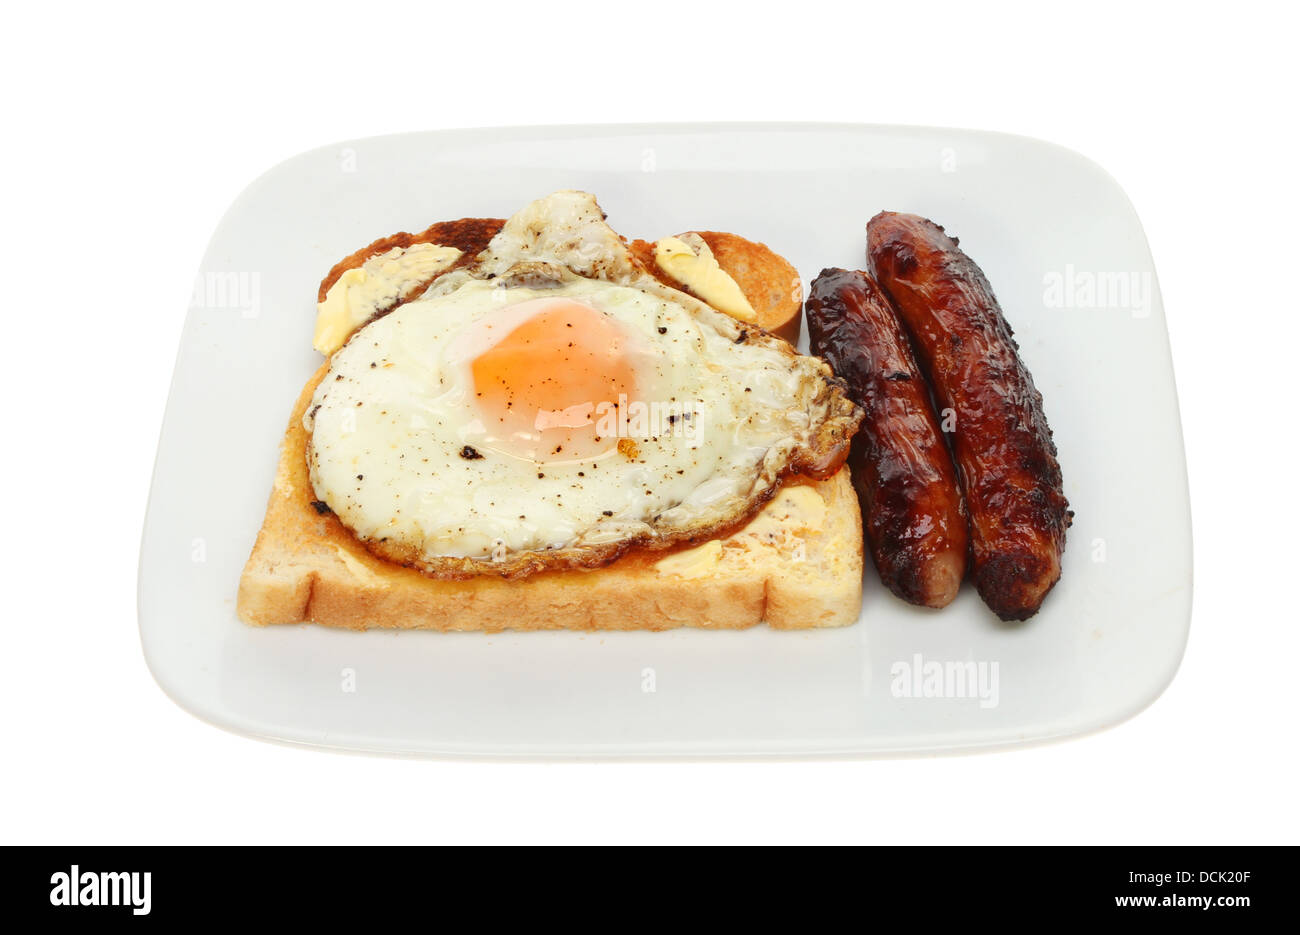 Sausages and fried egg on toast on a plate isolated against white Stock Photo